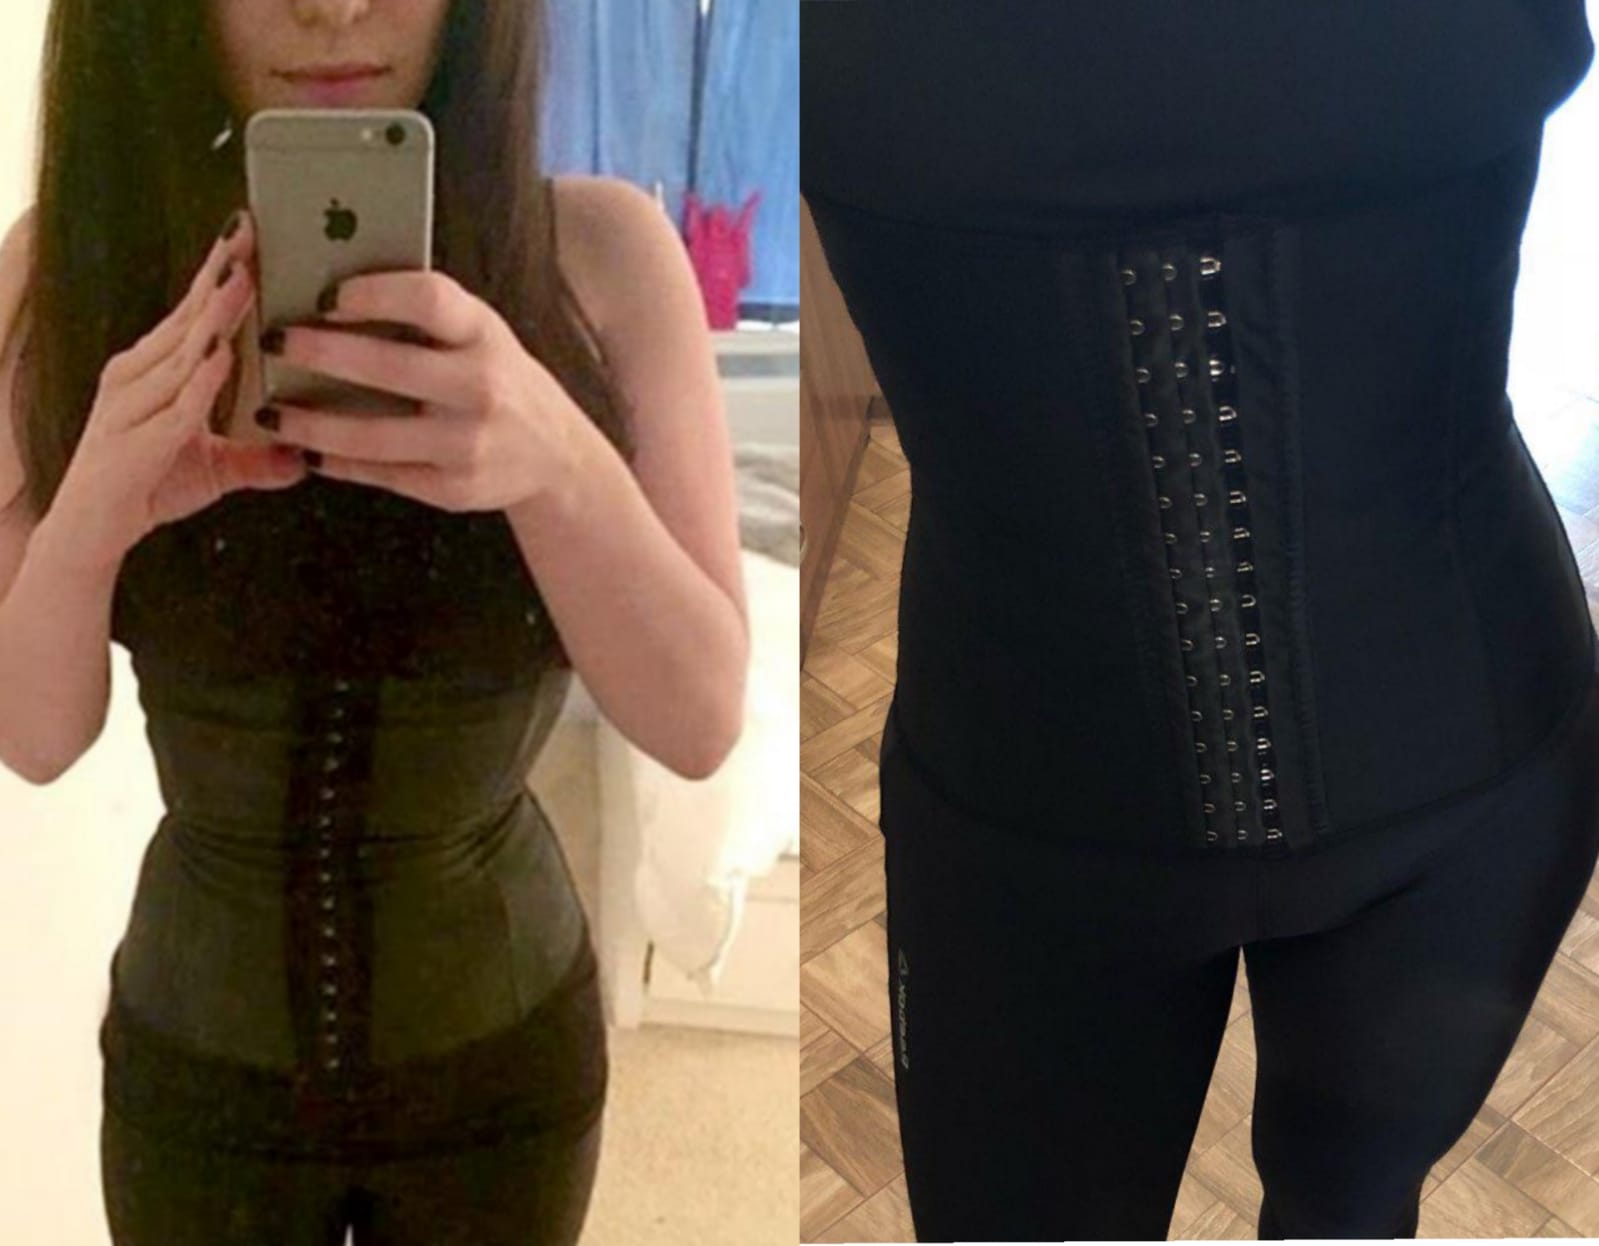 Guidelines on Using Waist Trainers: how tight is too tight?